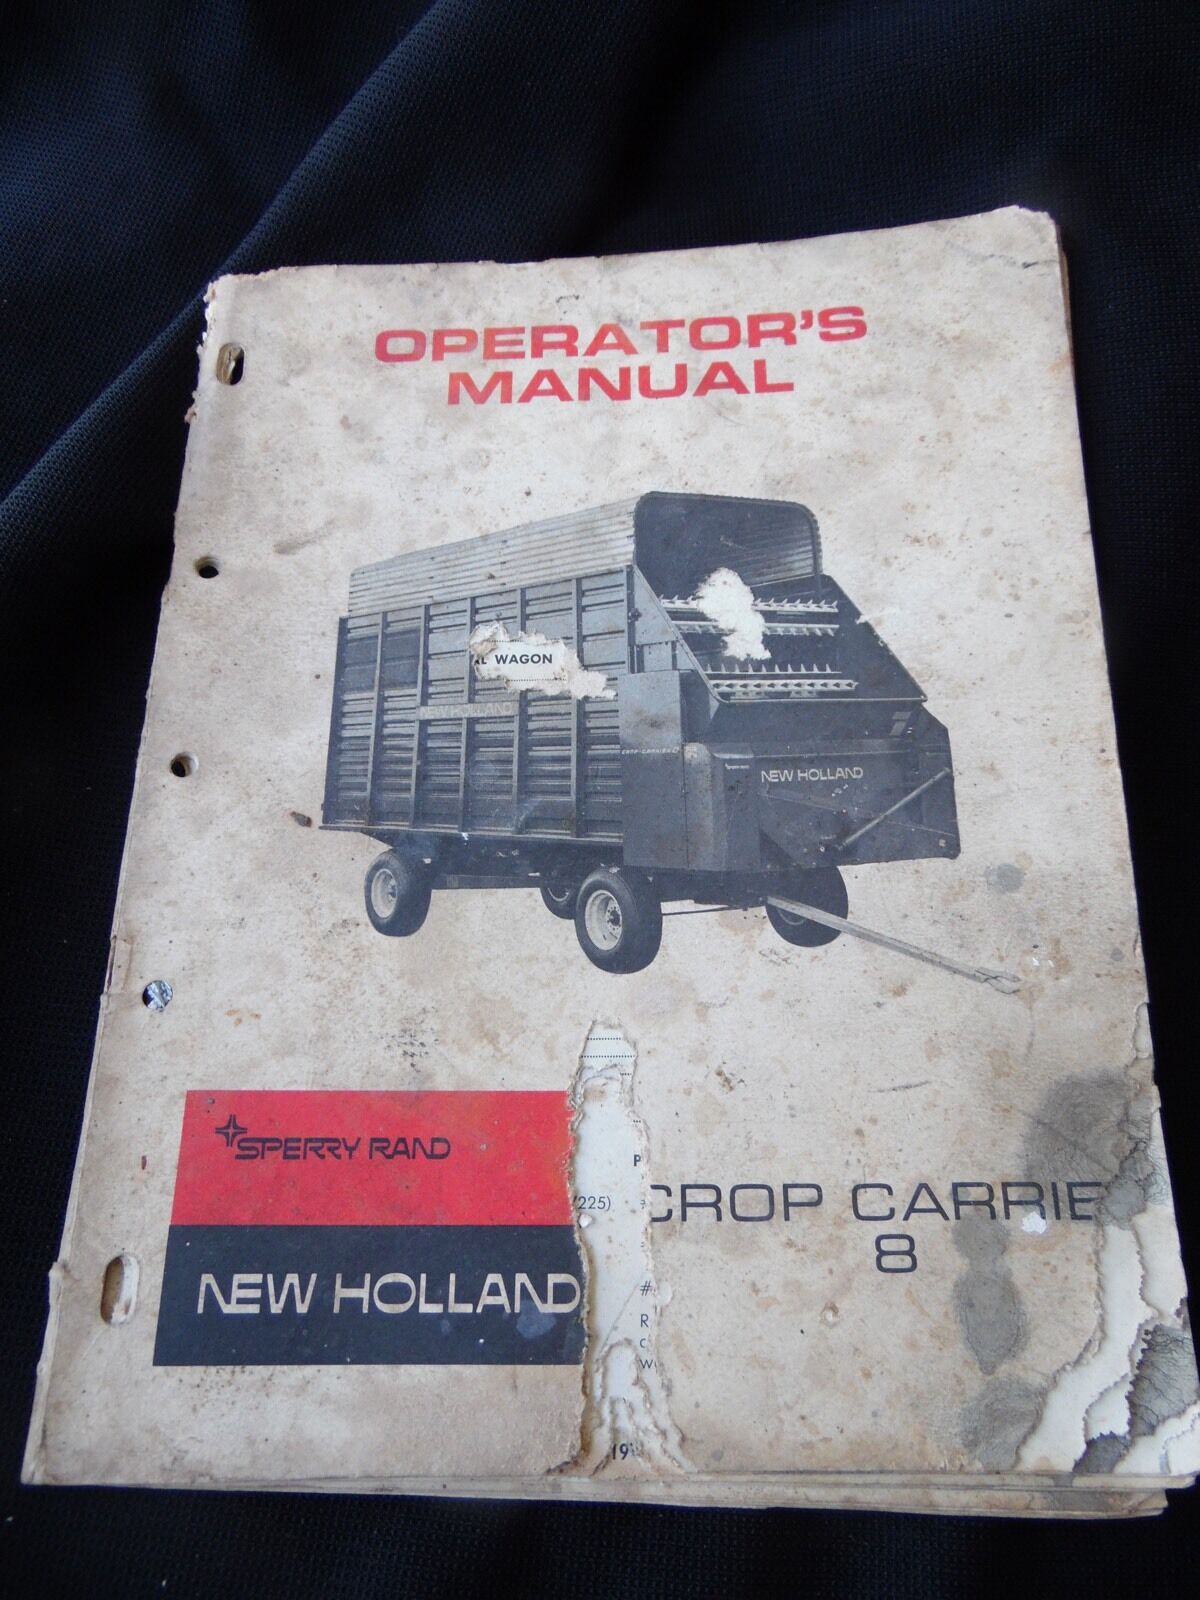 VINTAGE 1970 SPERRY RAND NEW HOLLAND CROP CARRIE 8 OPERATOR\'S MANUAL